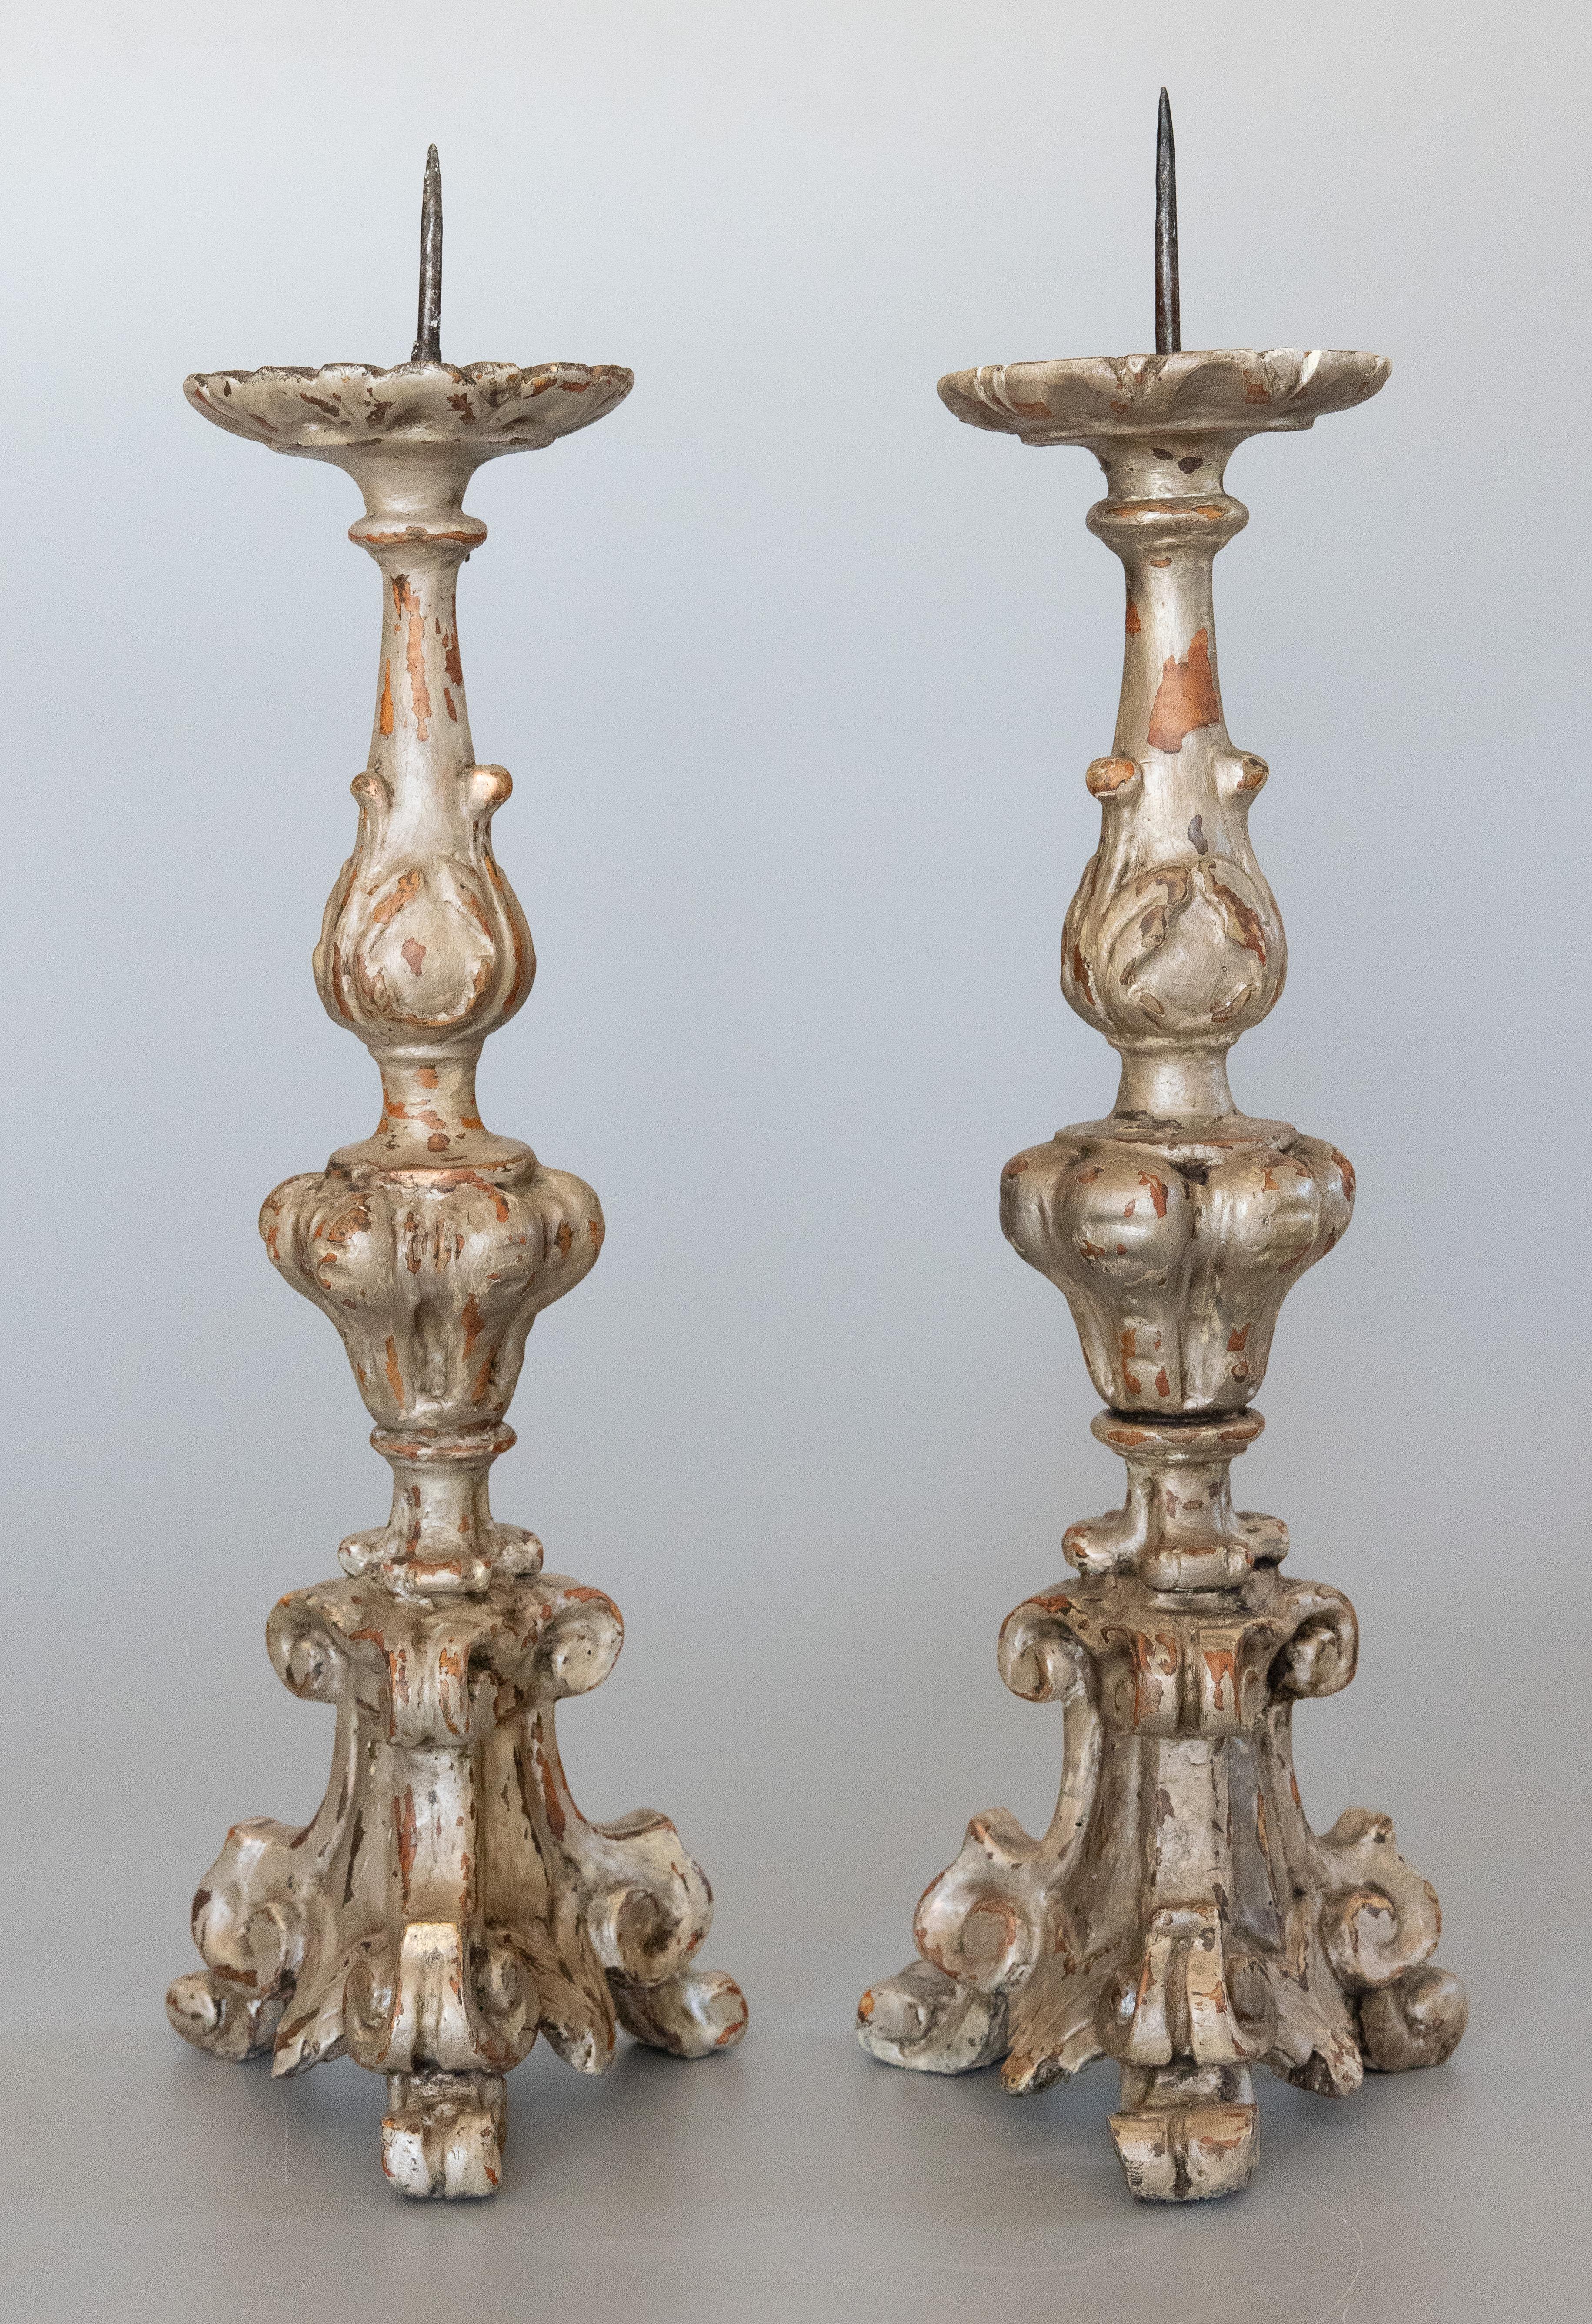 A stunning pair of antique 18th-Century Italian silvered wood tripod pricket altar candlesticks. These gorgeous cathedral candlesticks are a nice large size, silver gilded and ornately carved. They would be lovely displayed on a mantel or entry